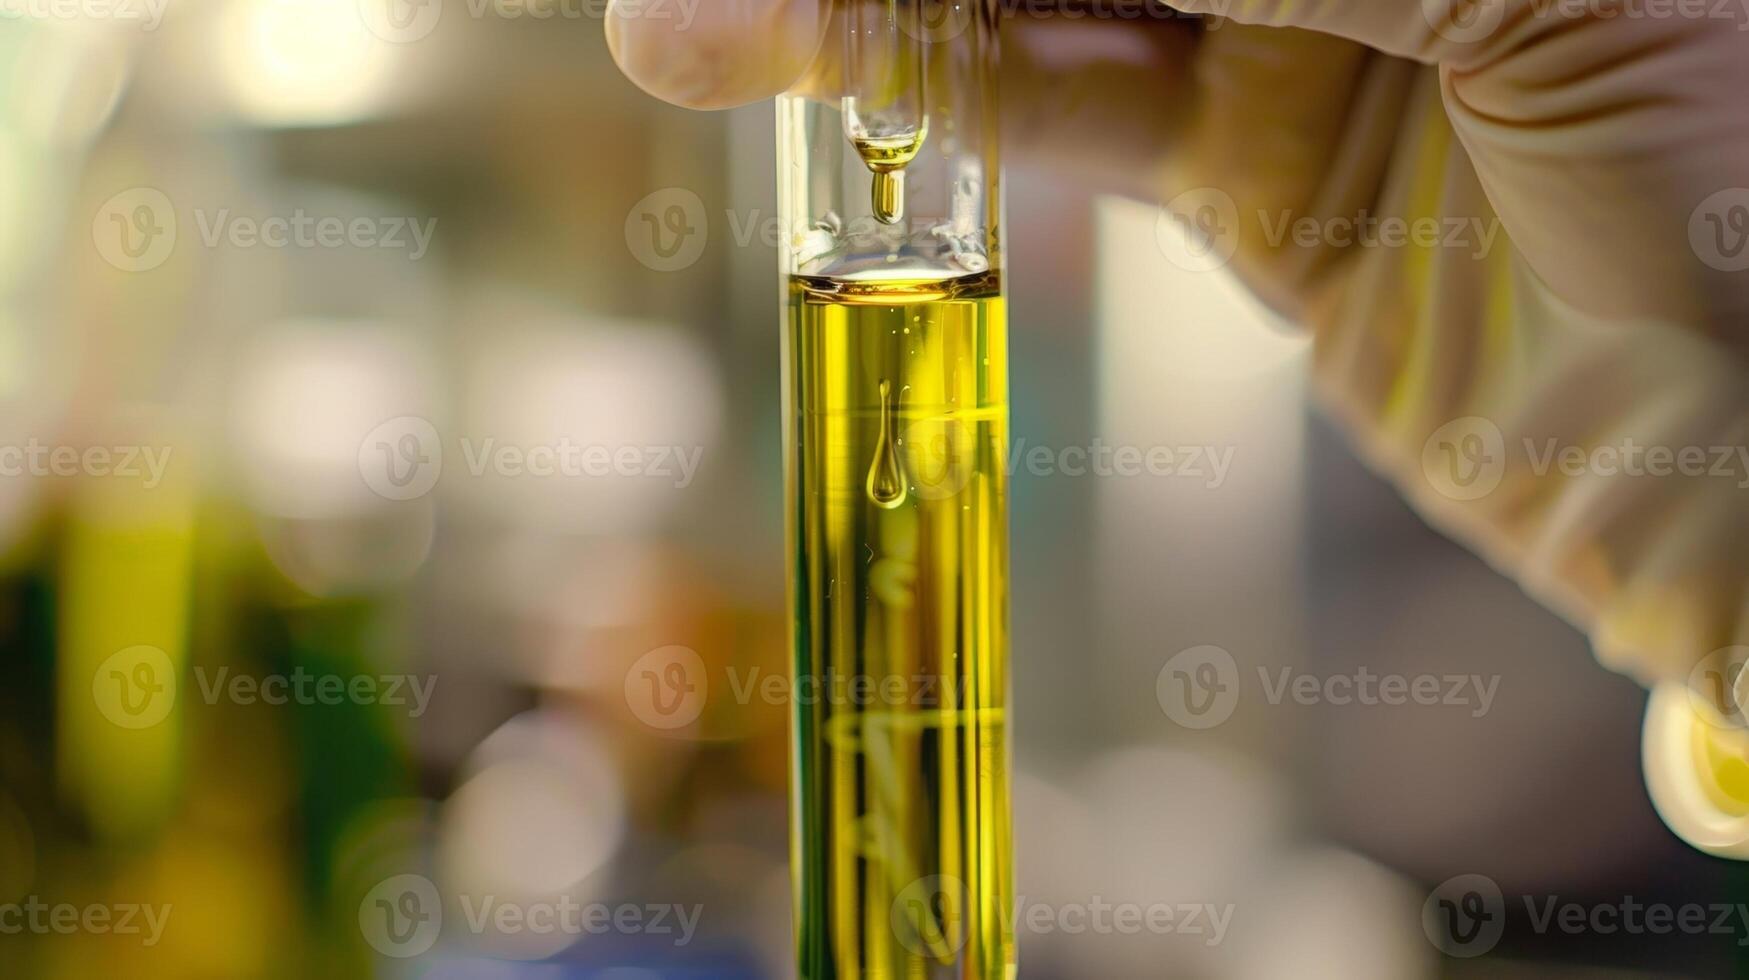 An olive oil sommelier demonstrating the proper way to taste and assess the quality of an olive oil sample photo